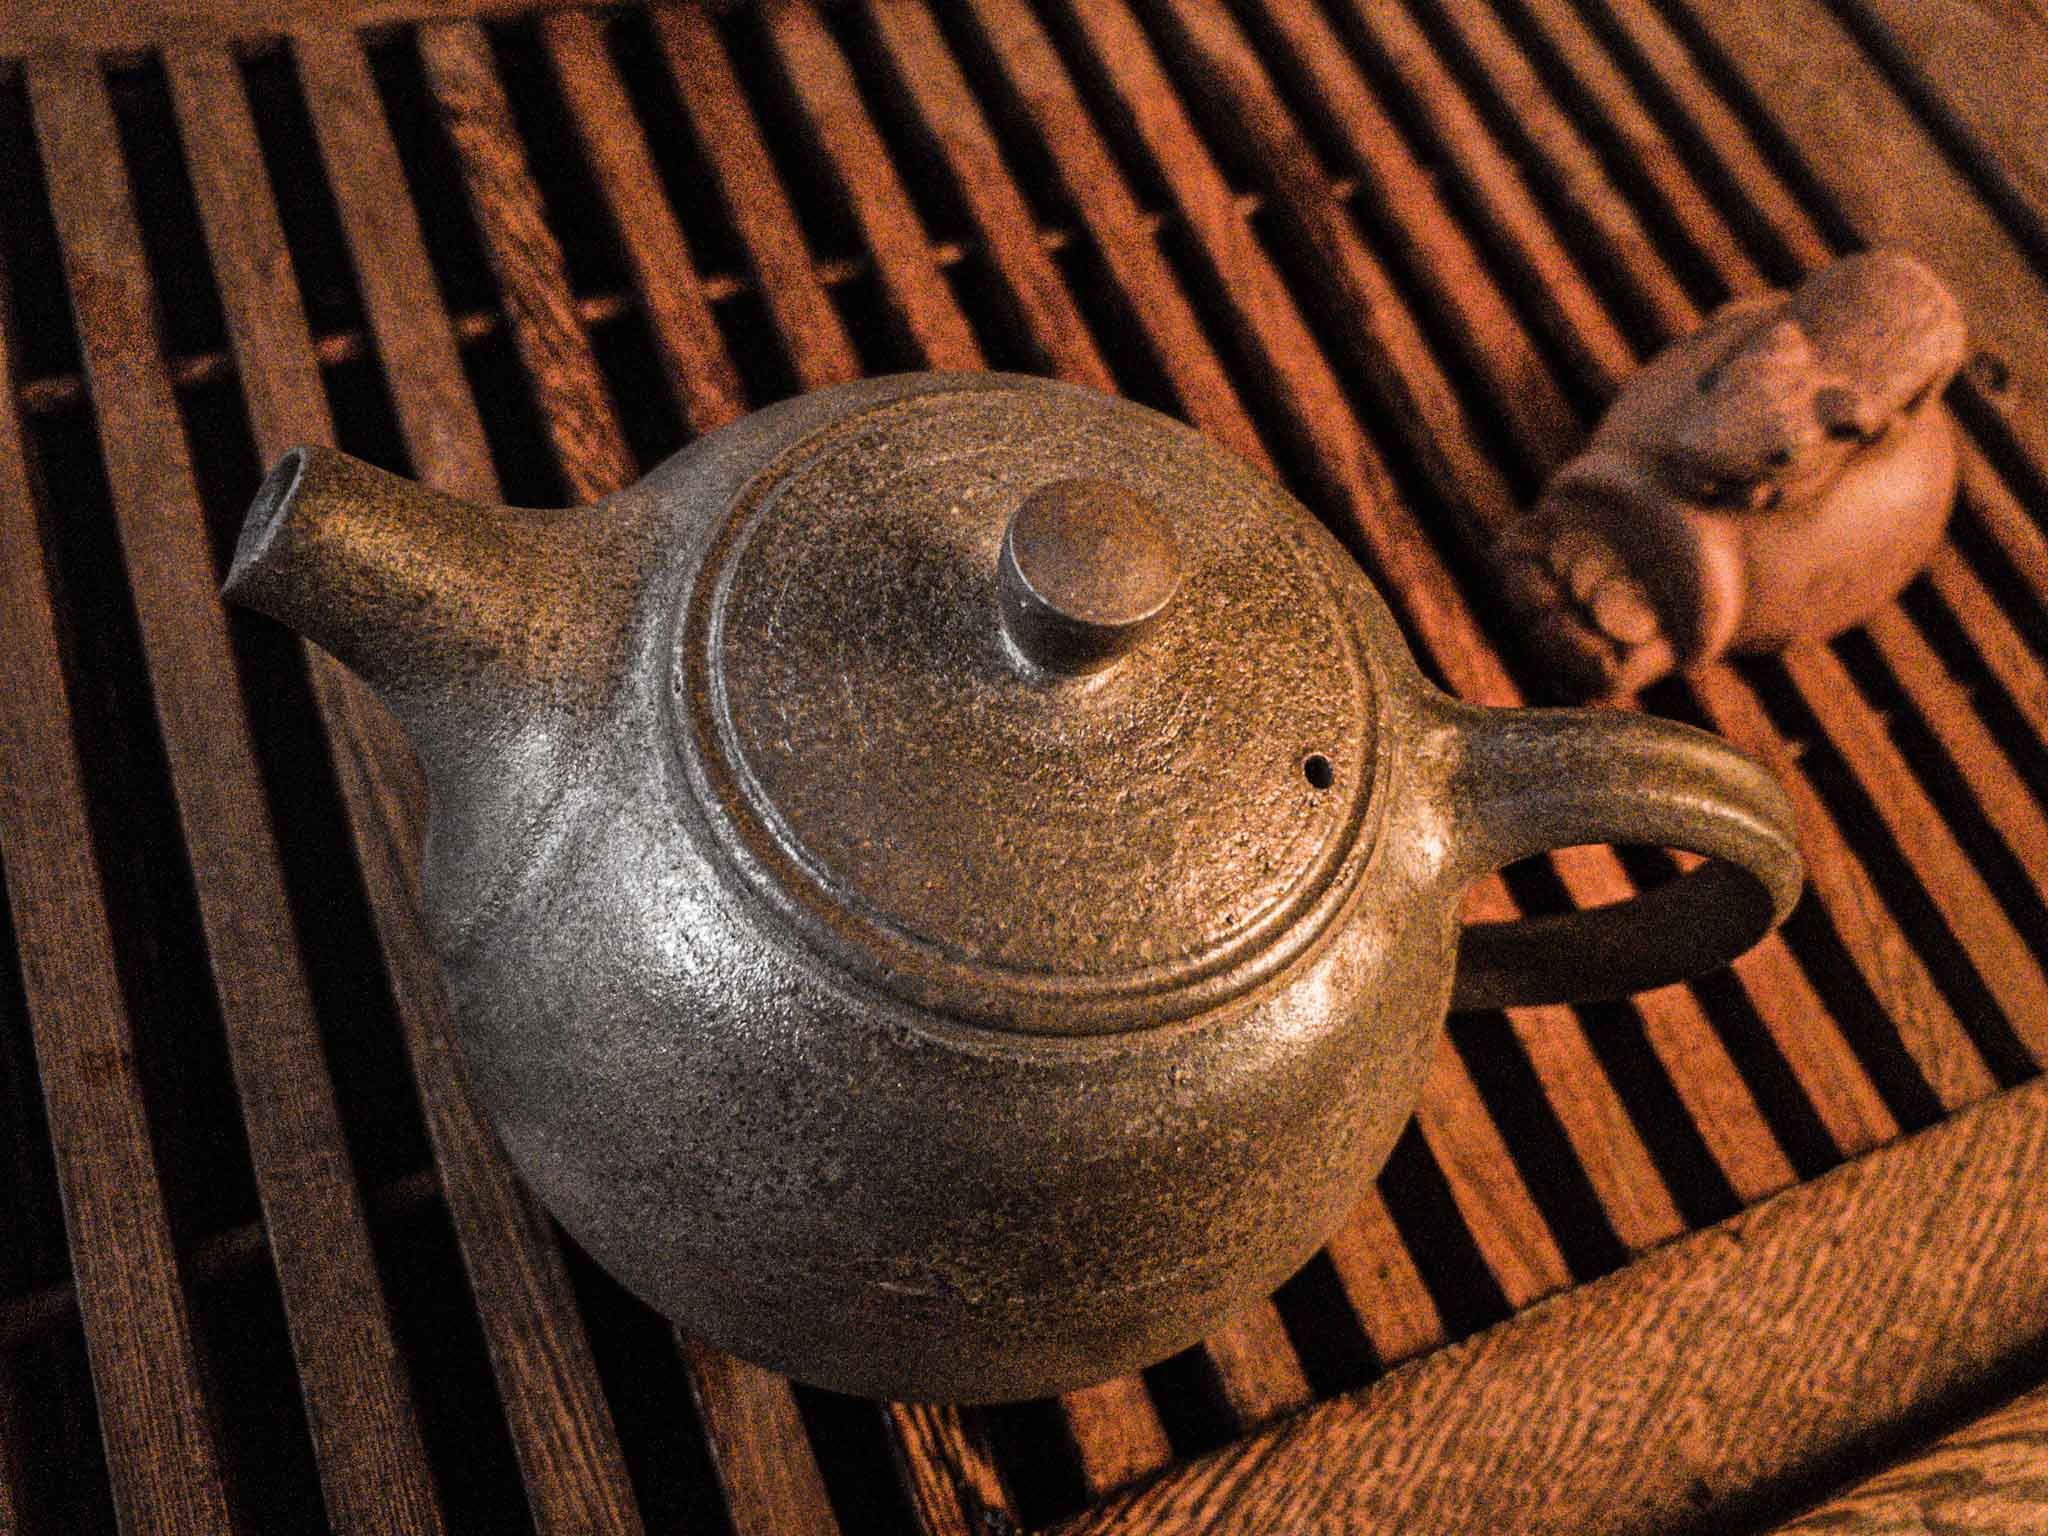 A nice oolong teapot, photoshop level over 9000